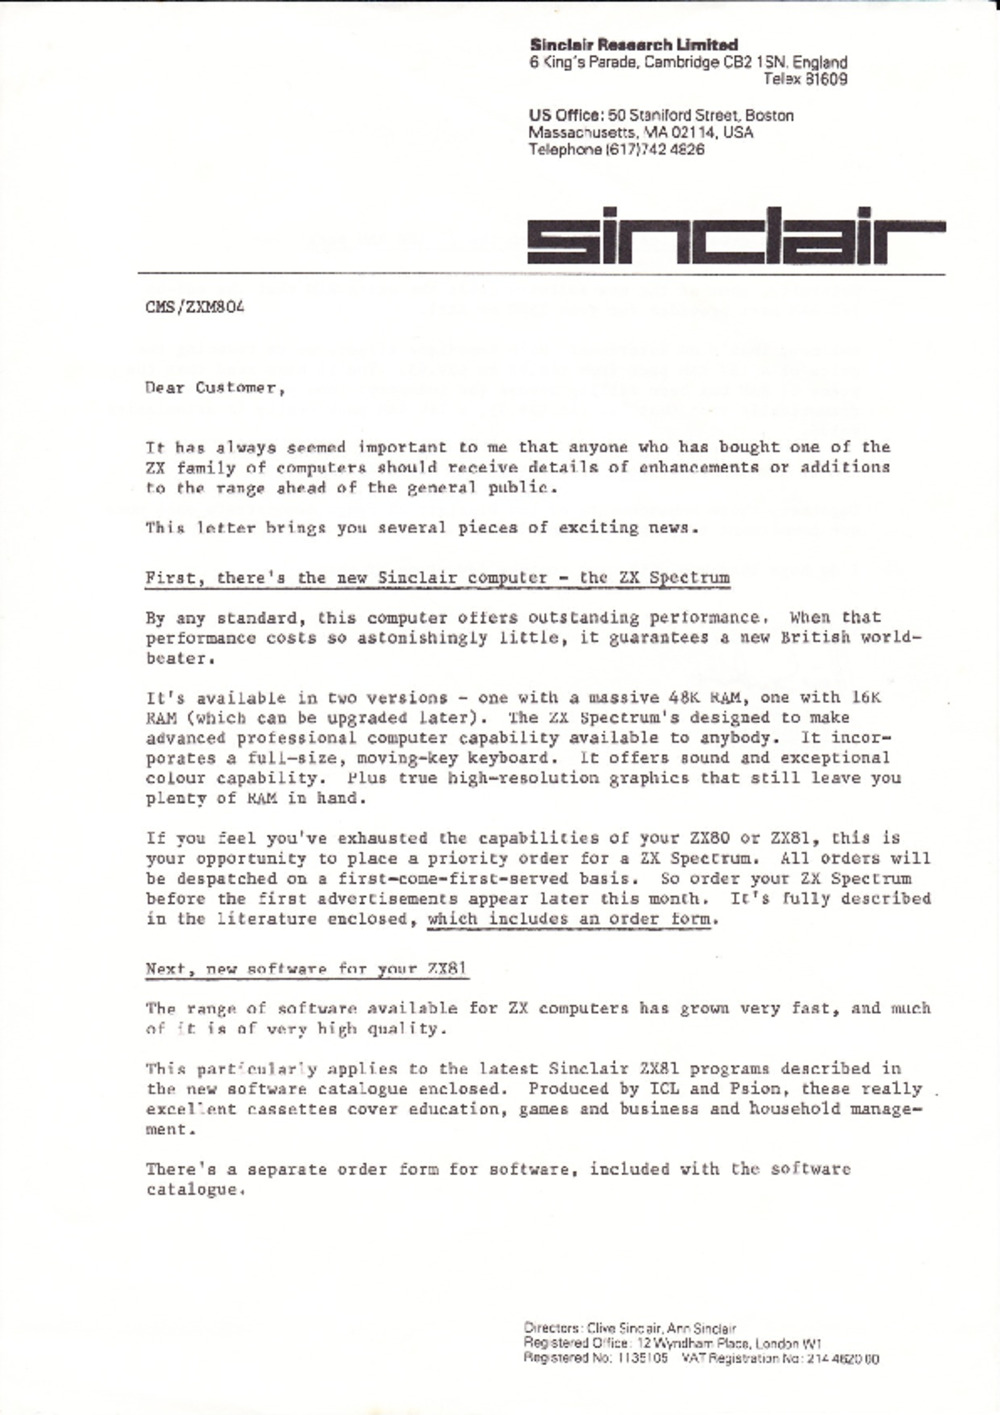 Article: Sinclair ZX Spectrum Release and New ZX81 Software Letter